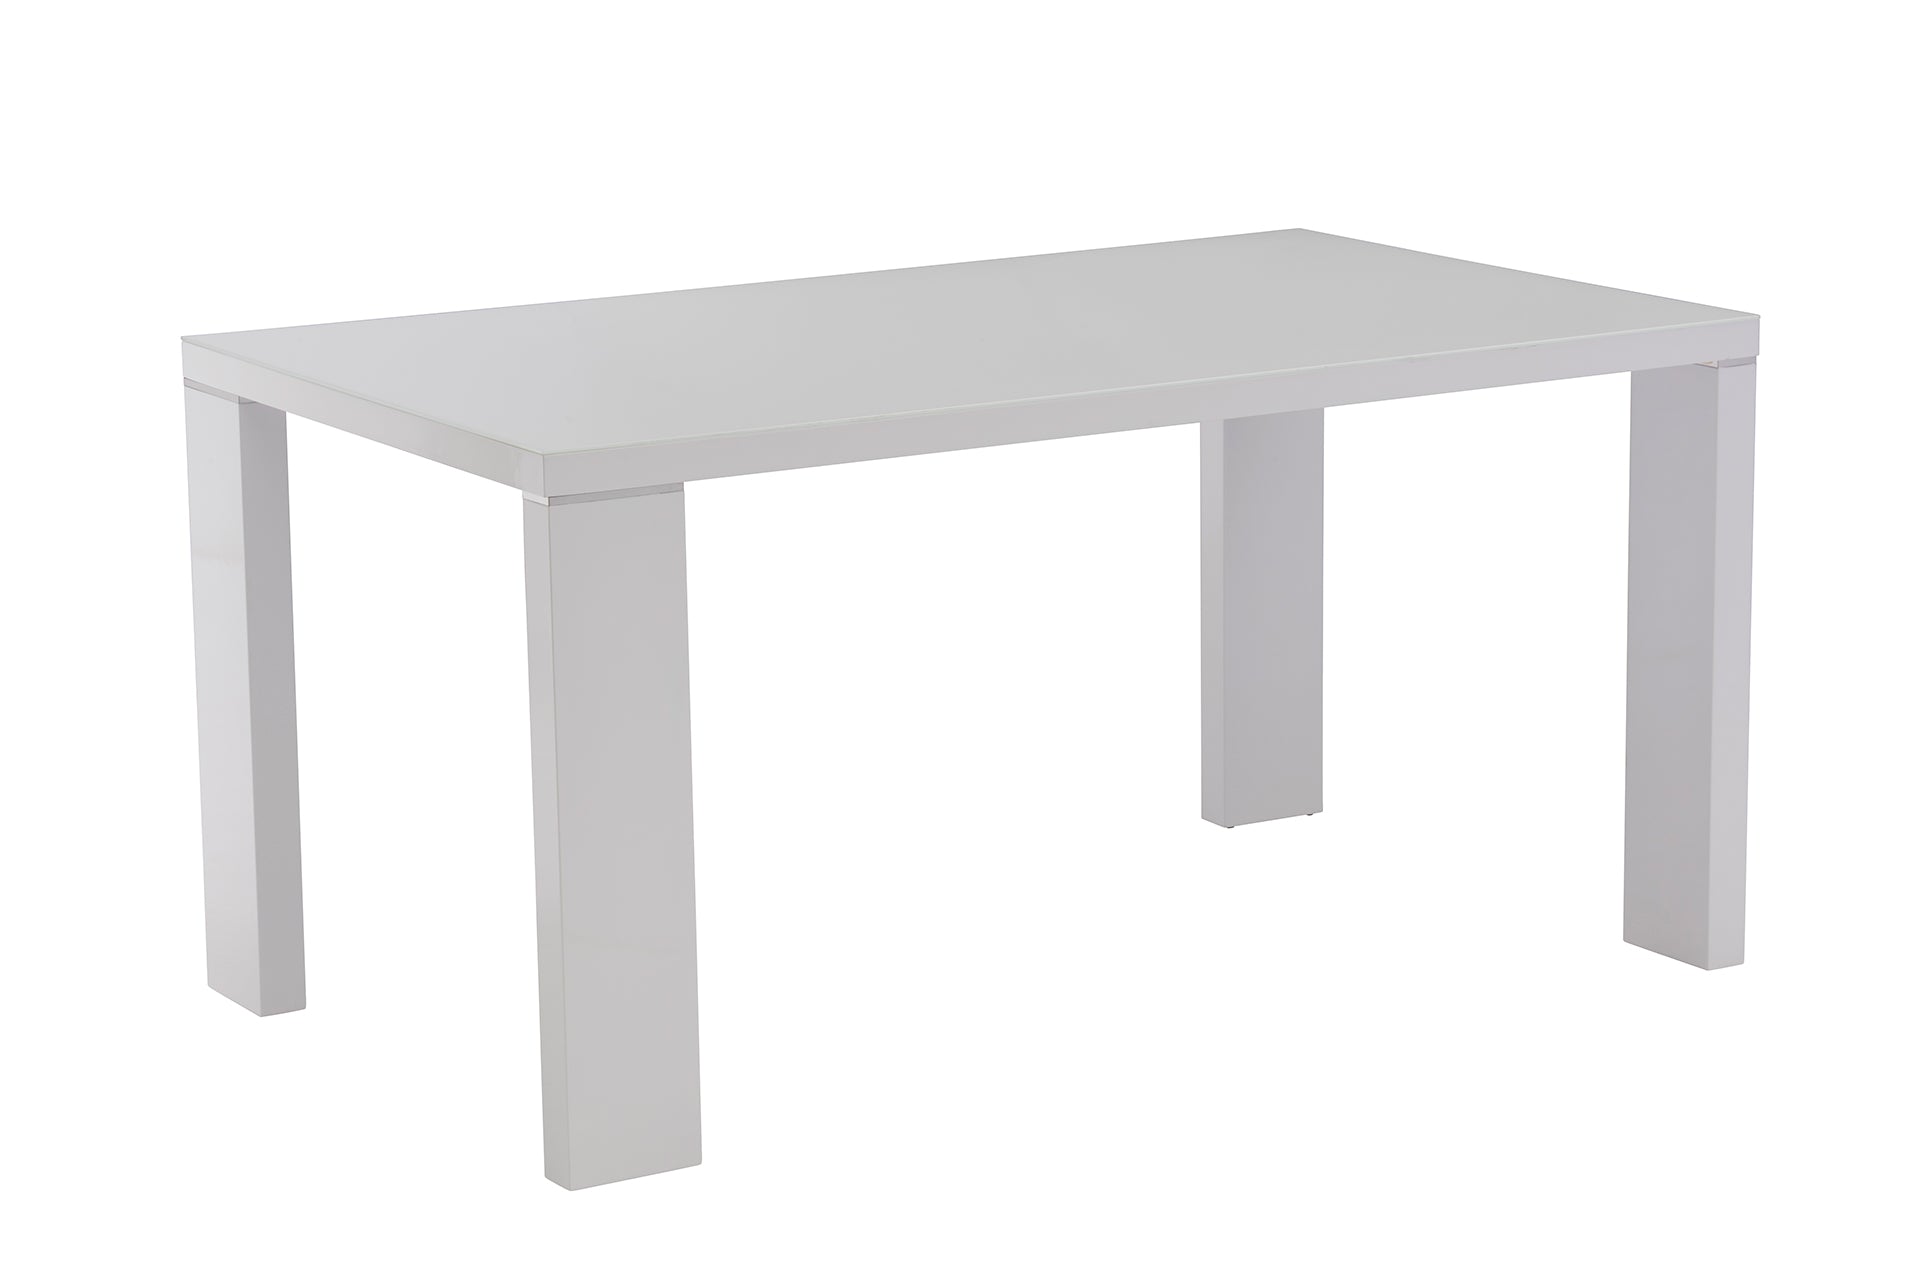 Solihull 1.5m Dining Table - White